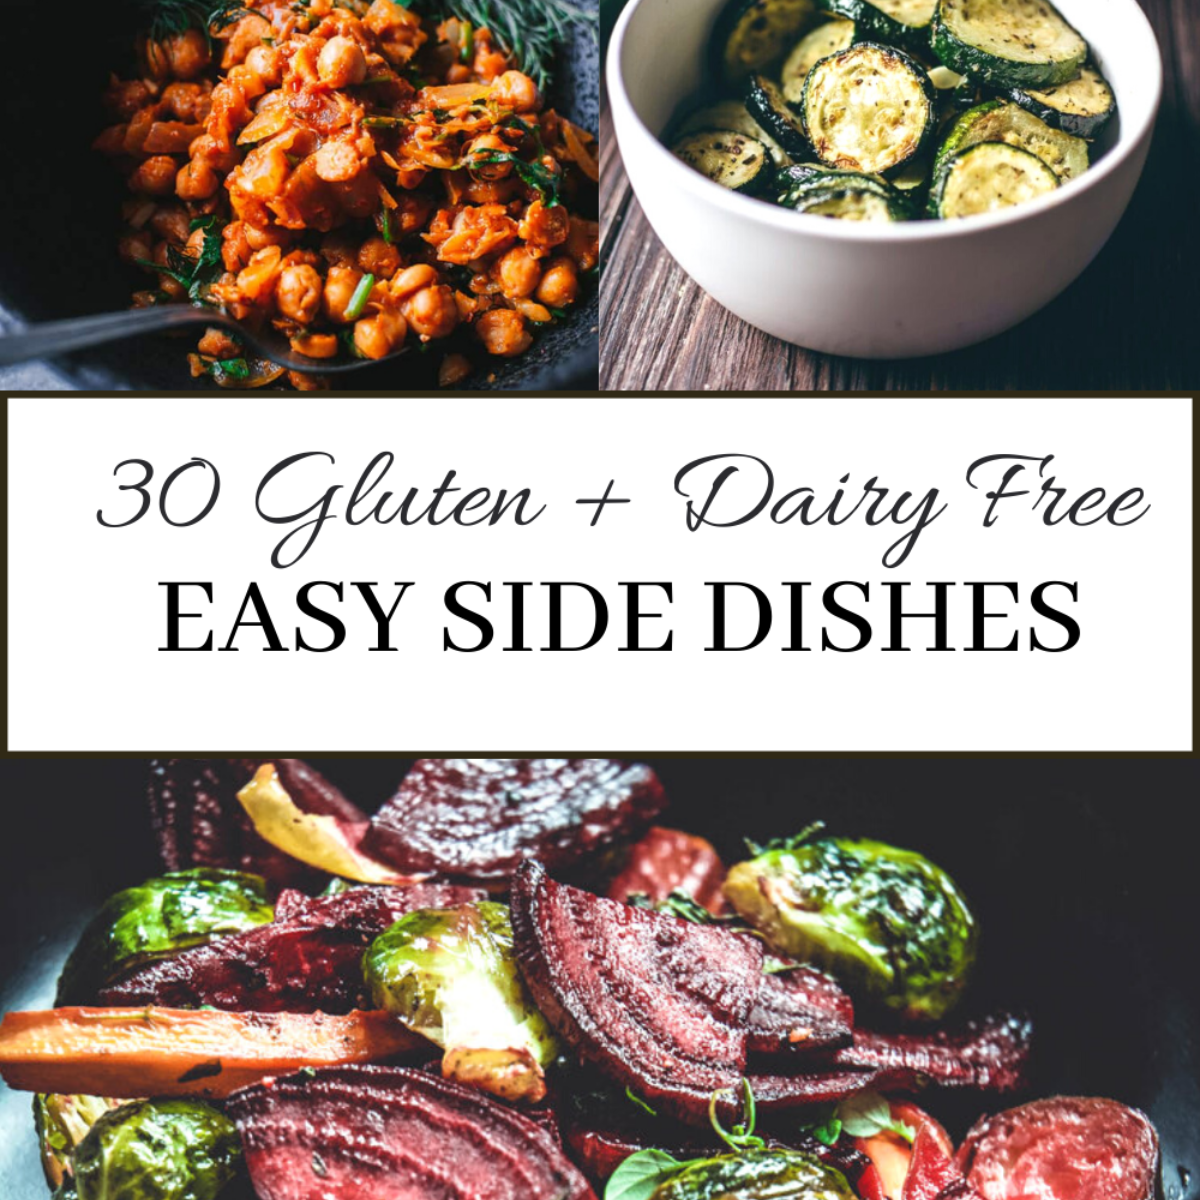 https://calmeats.com/wp-content/uploads/2022/09/gluten-and-dairy-free-side-dishes-featured-image.png